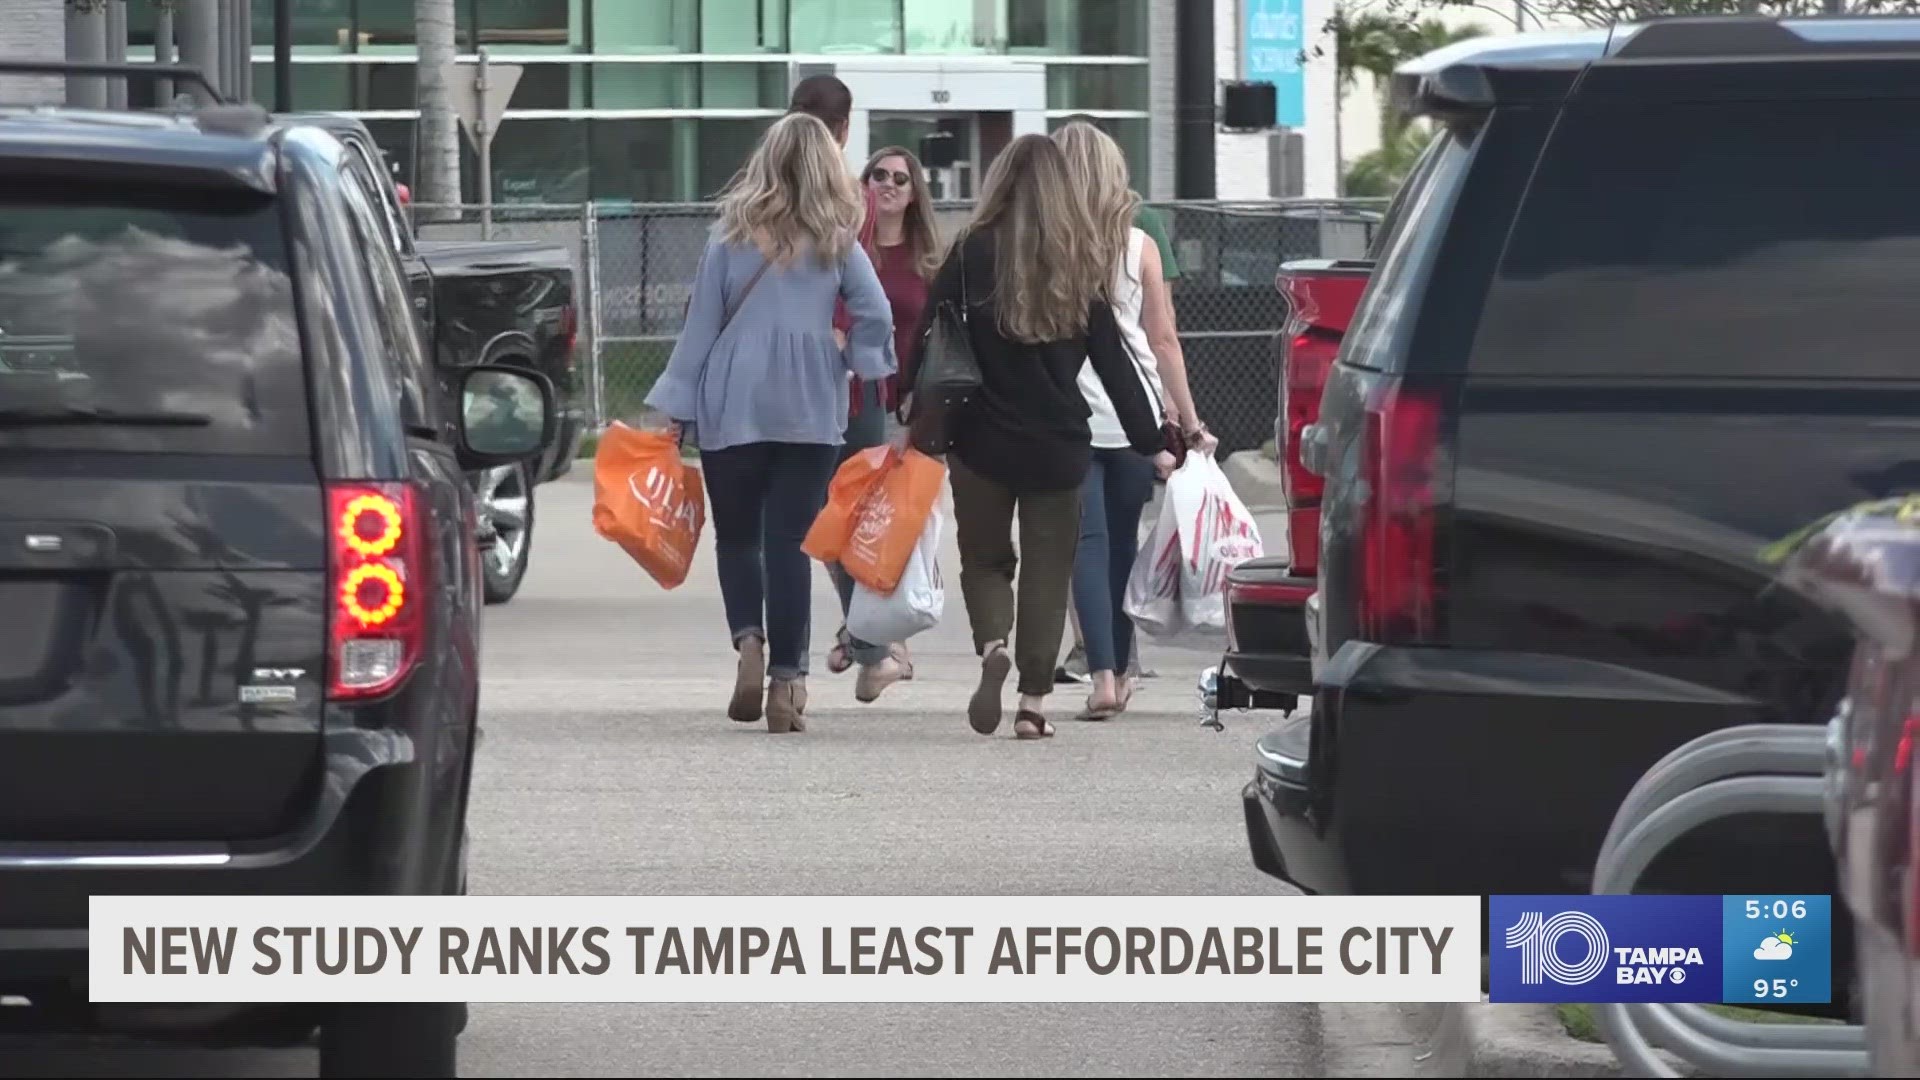 To spend 30% of your income on housing, you’d need to earn $87,000 in Tampa.